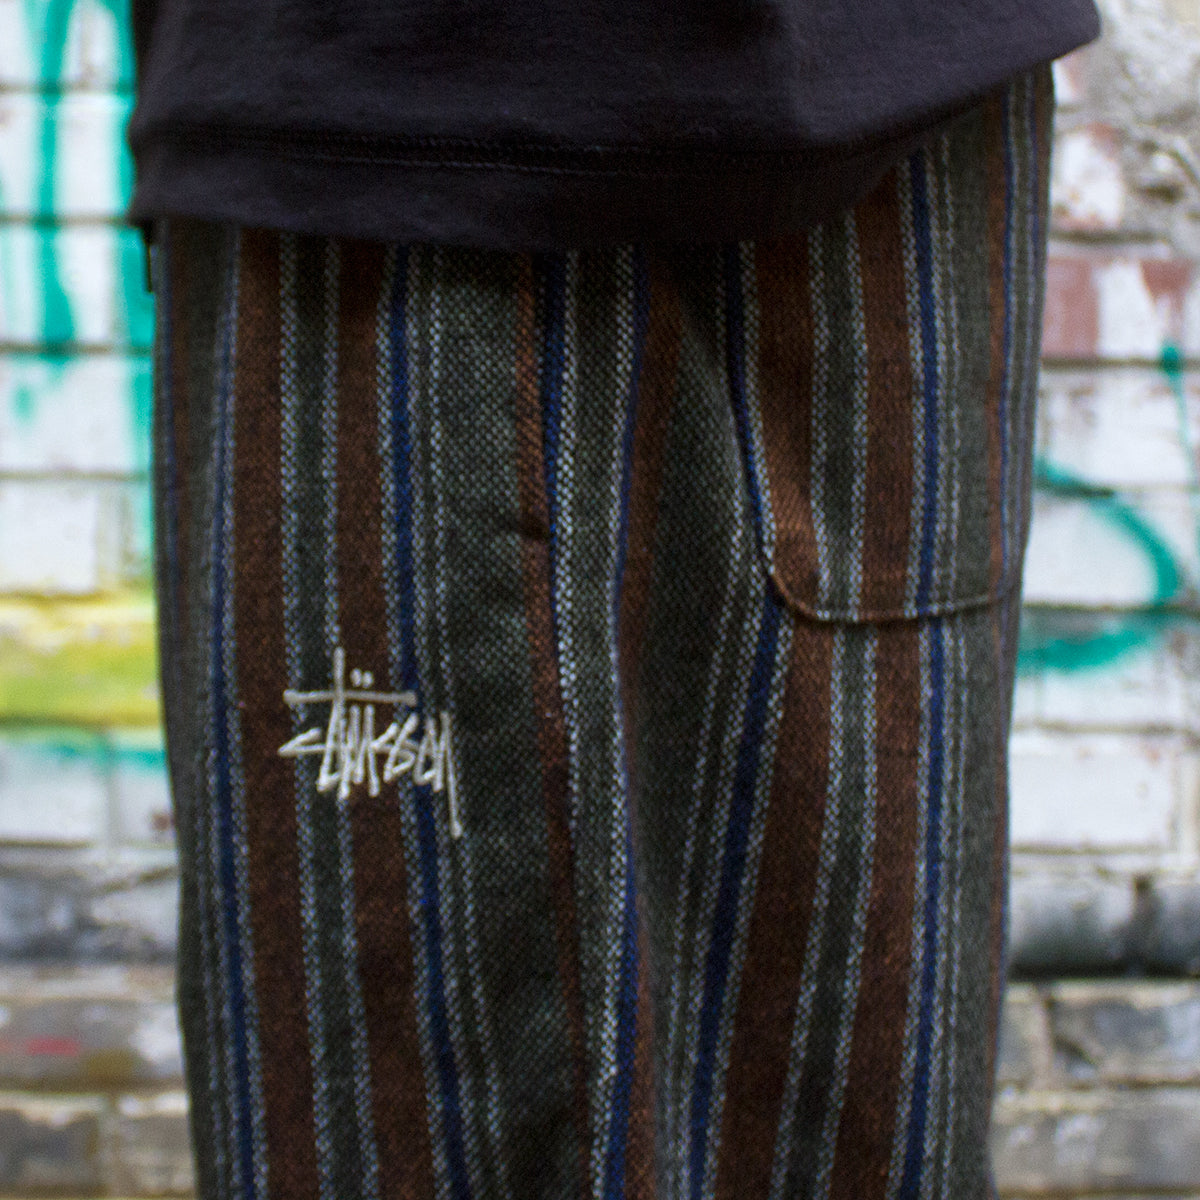 Wool Stripe Relaxed Pant